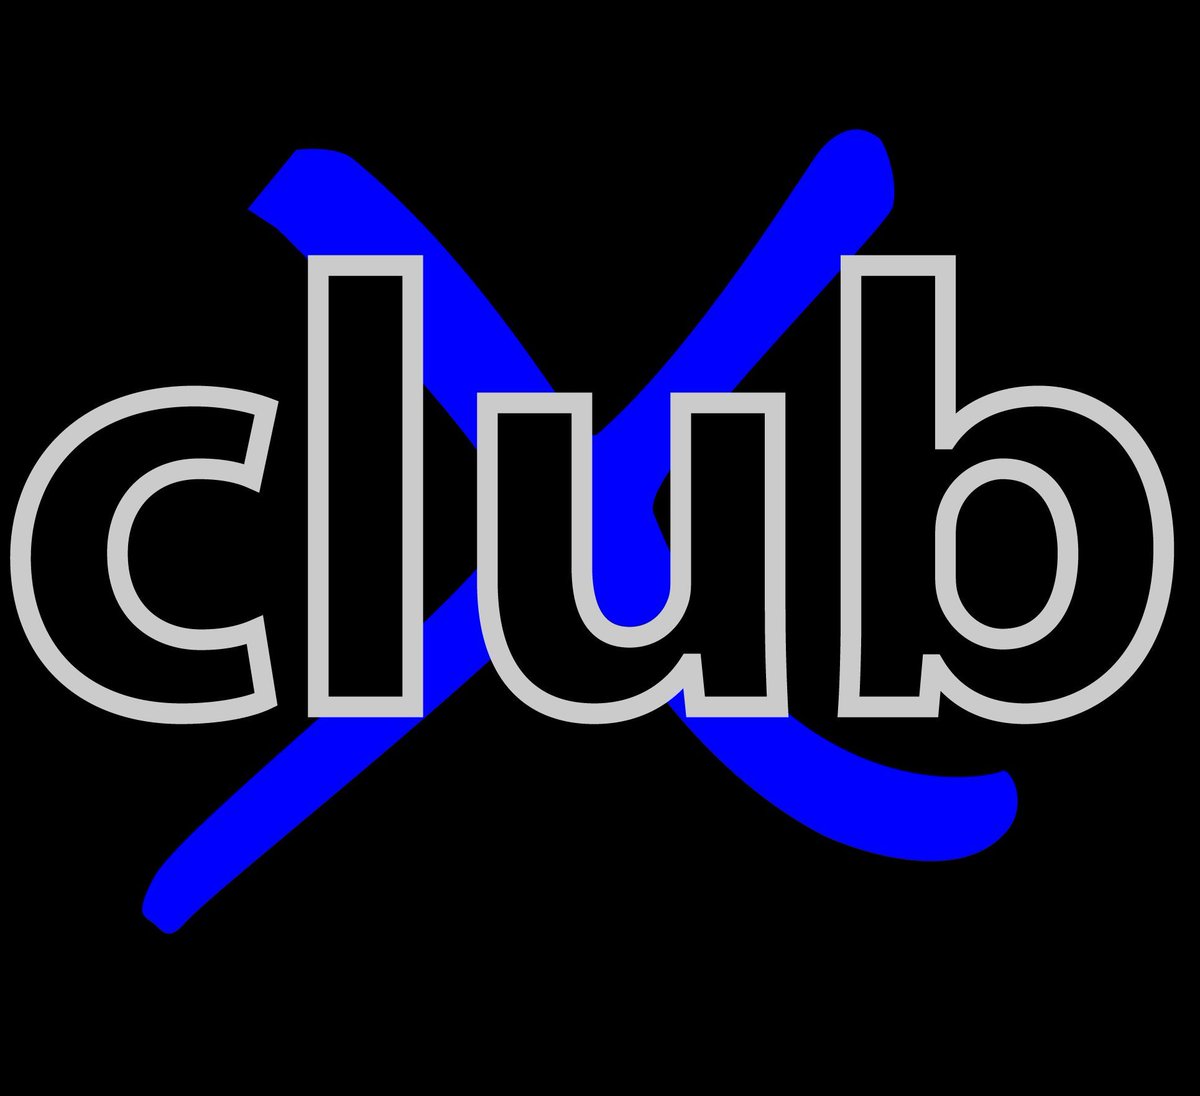 #fridayfeeling #bestgym @clubXmiami 😀

transforming lives daily, #clubX is a limited membership, private fitness club capped at just 750 members

#gym #fitnessclub #coralgables #boutiquefitness #sweatlocal #liftlocal #localgym  #gymtime #gymcraving #wellness #fitfam #fitnesslife